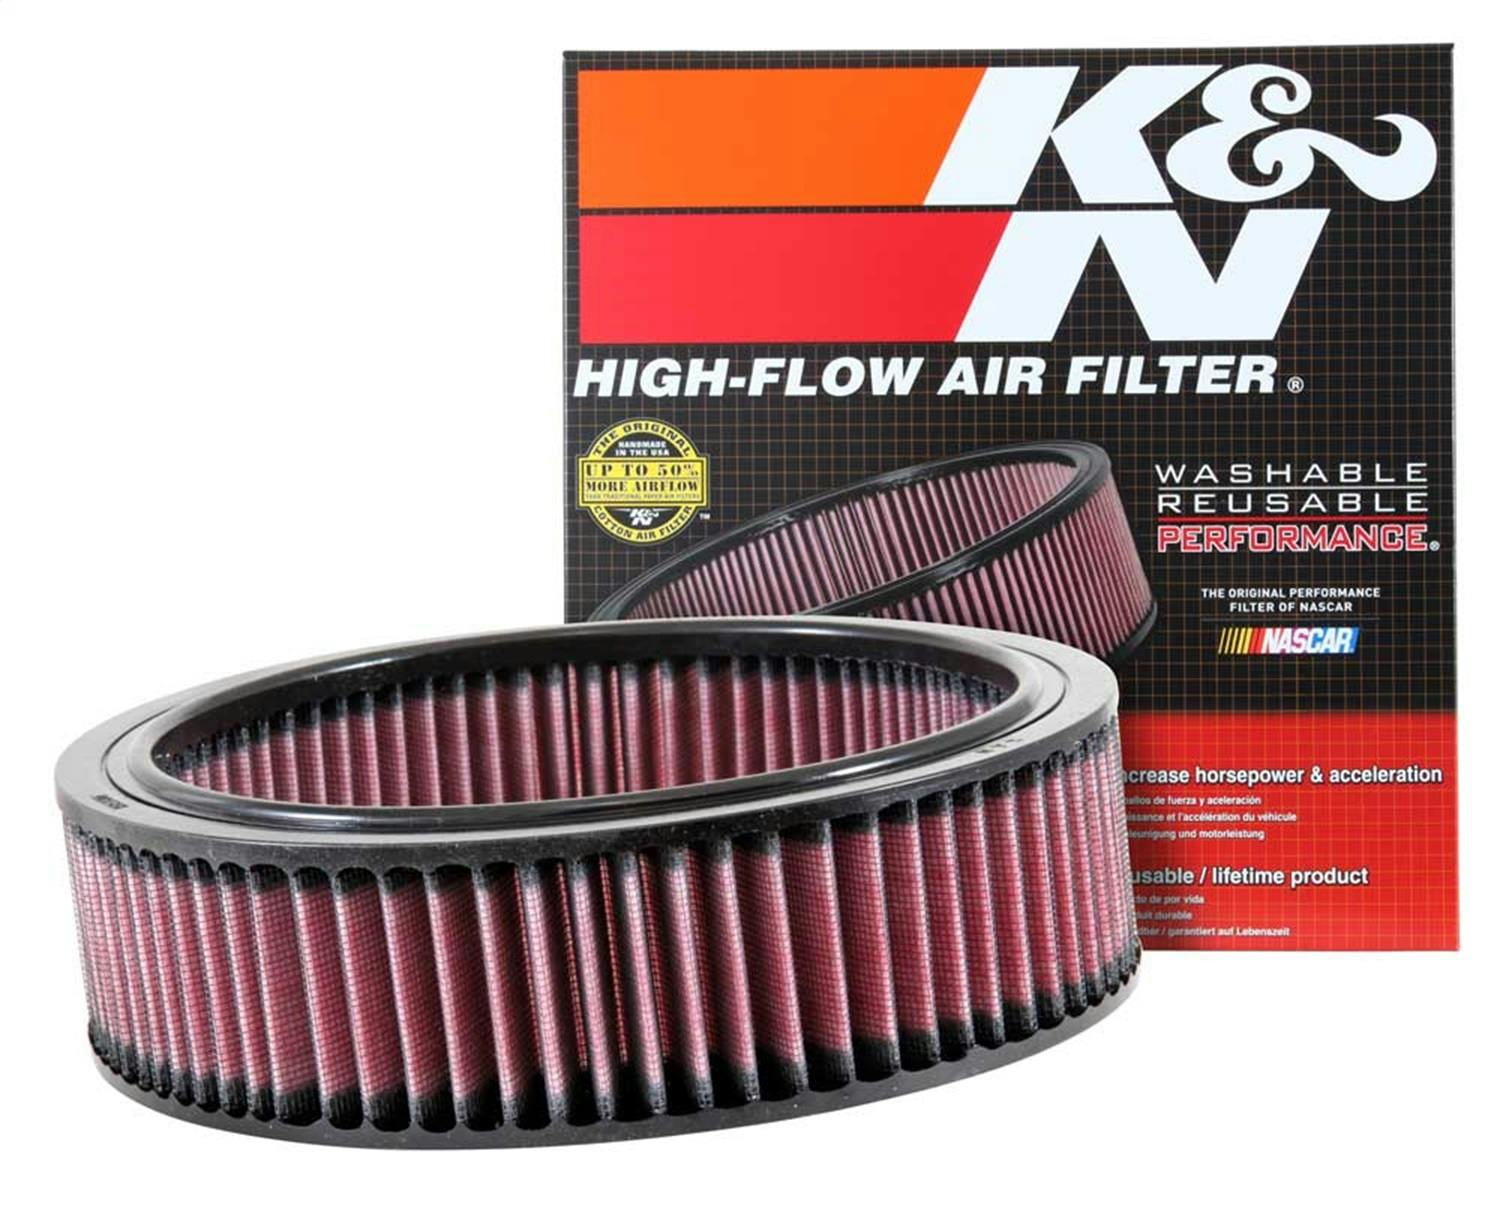 B1500 E-1100 B2500 K&N Replacement Air Filter for Dodge Ram 2500